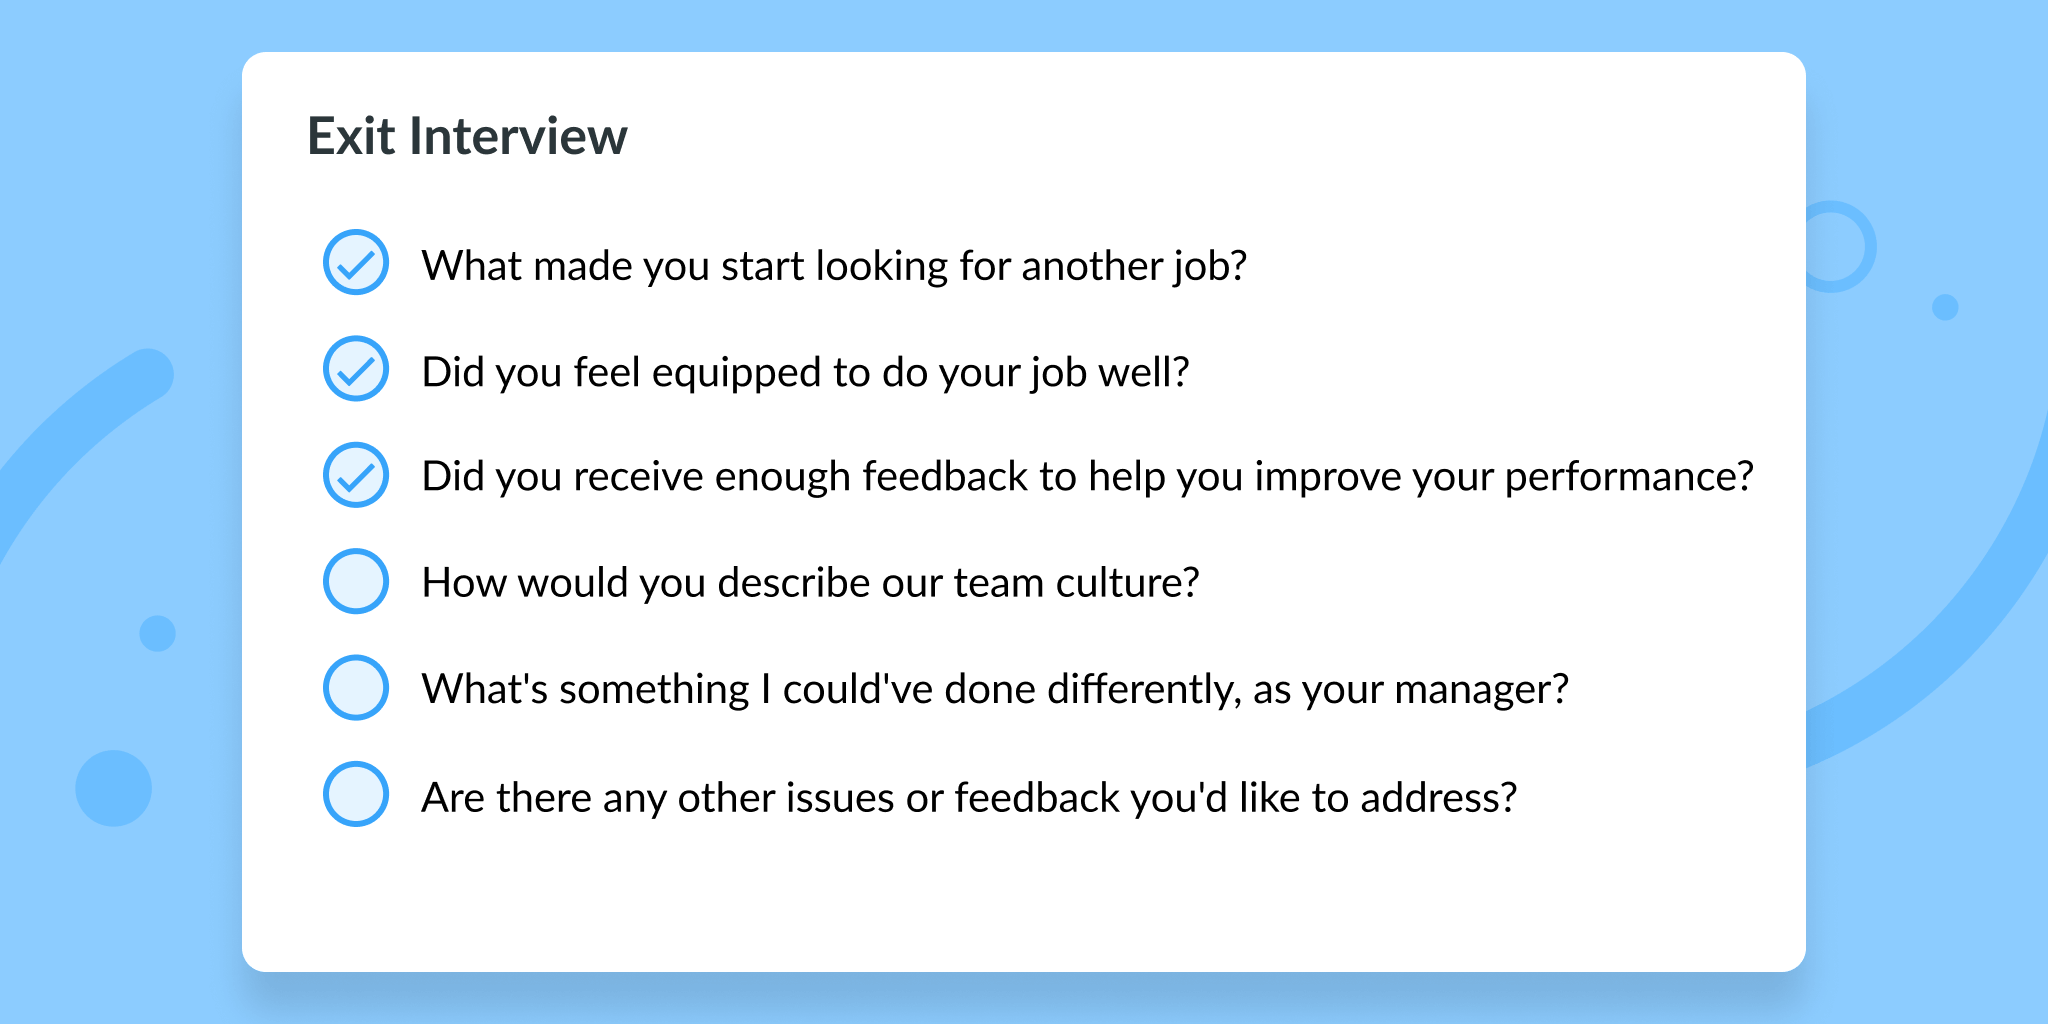 Exit Interview Template | 6 Must-Ask Exit Interview Questions | Fellow.app